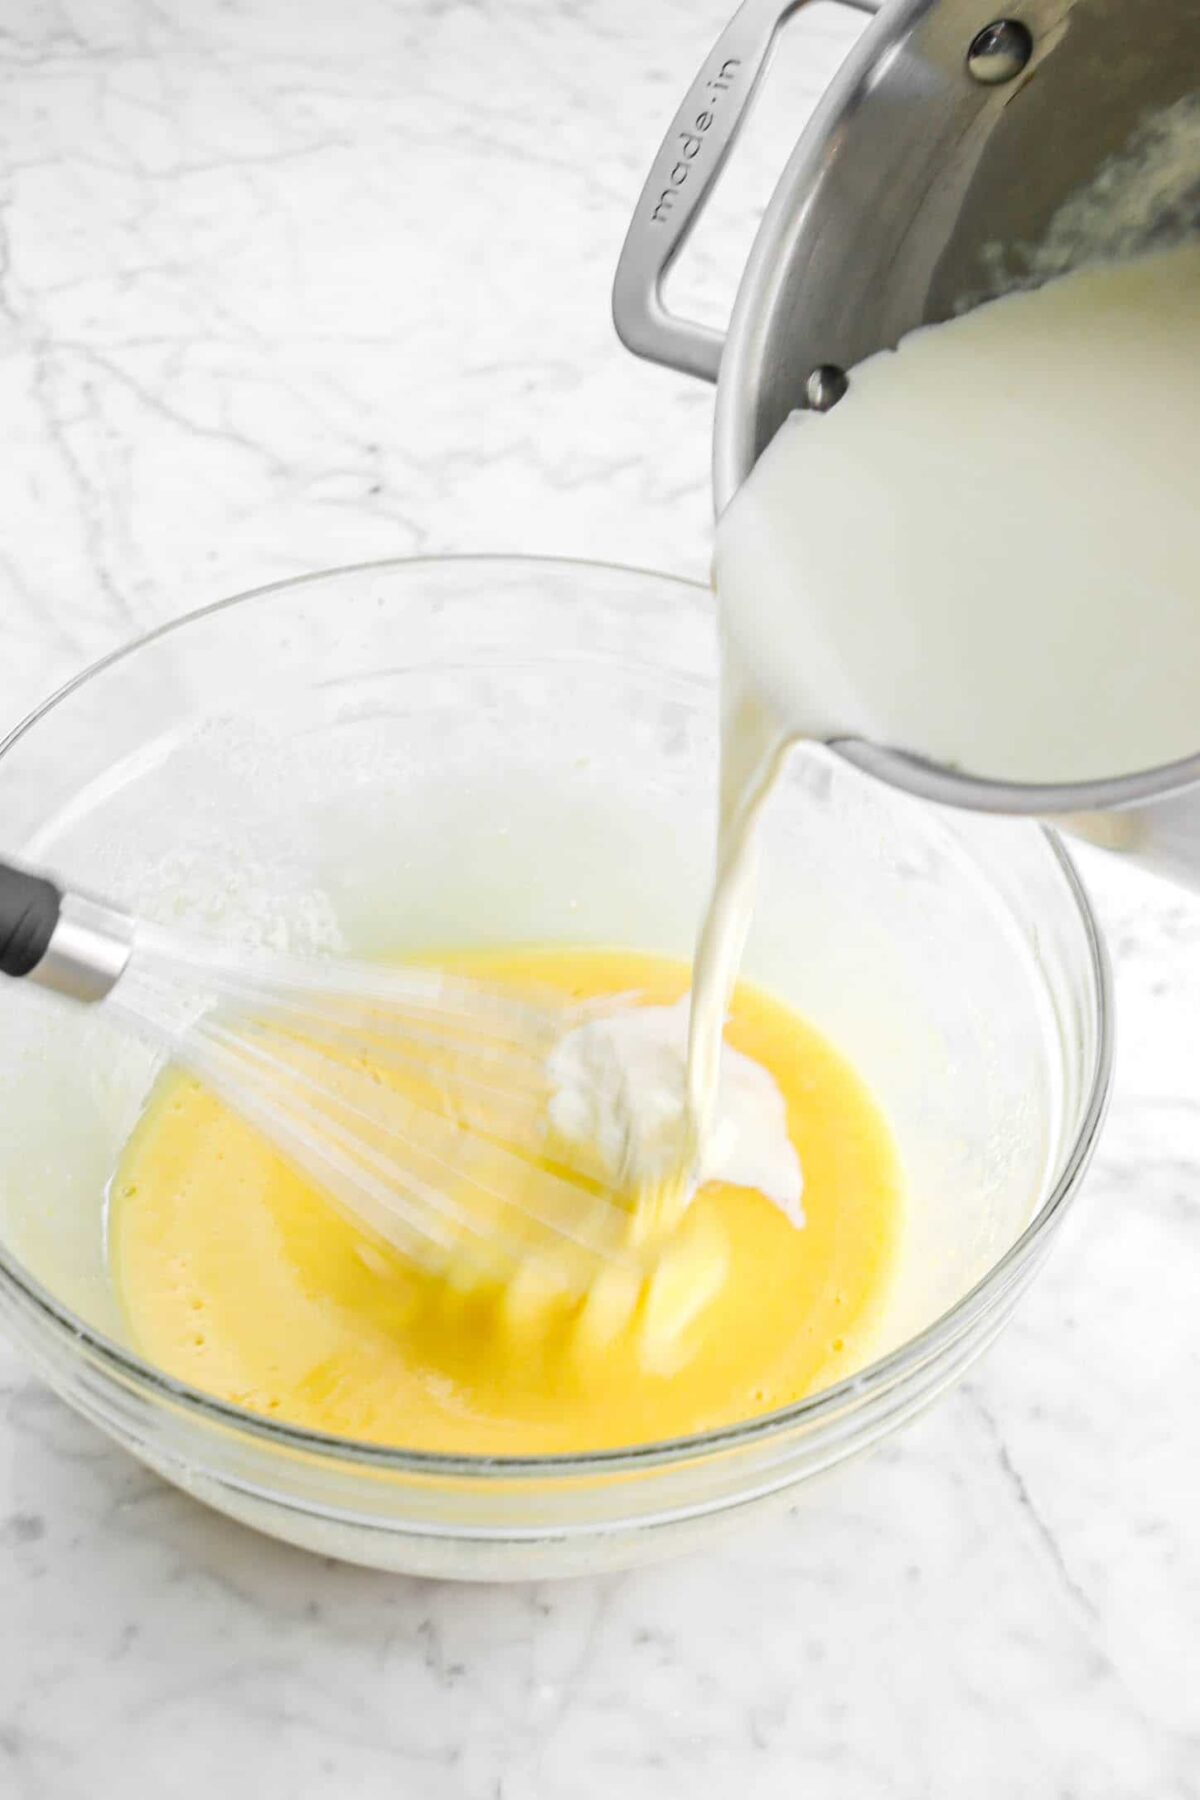 heavy cream being poured into egg mixture